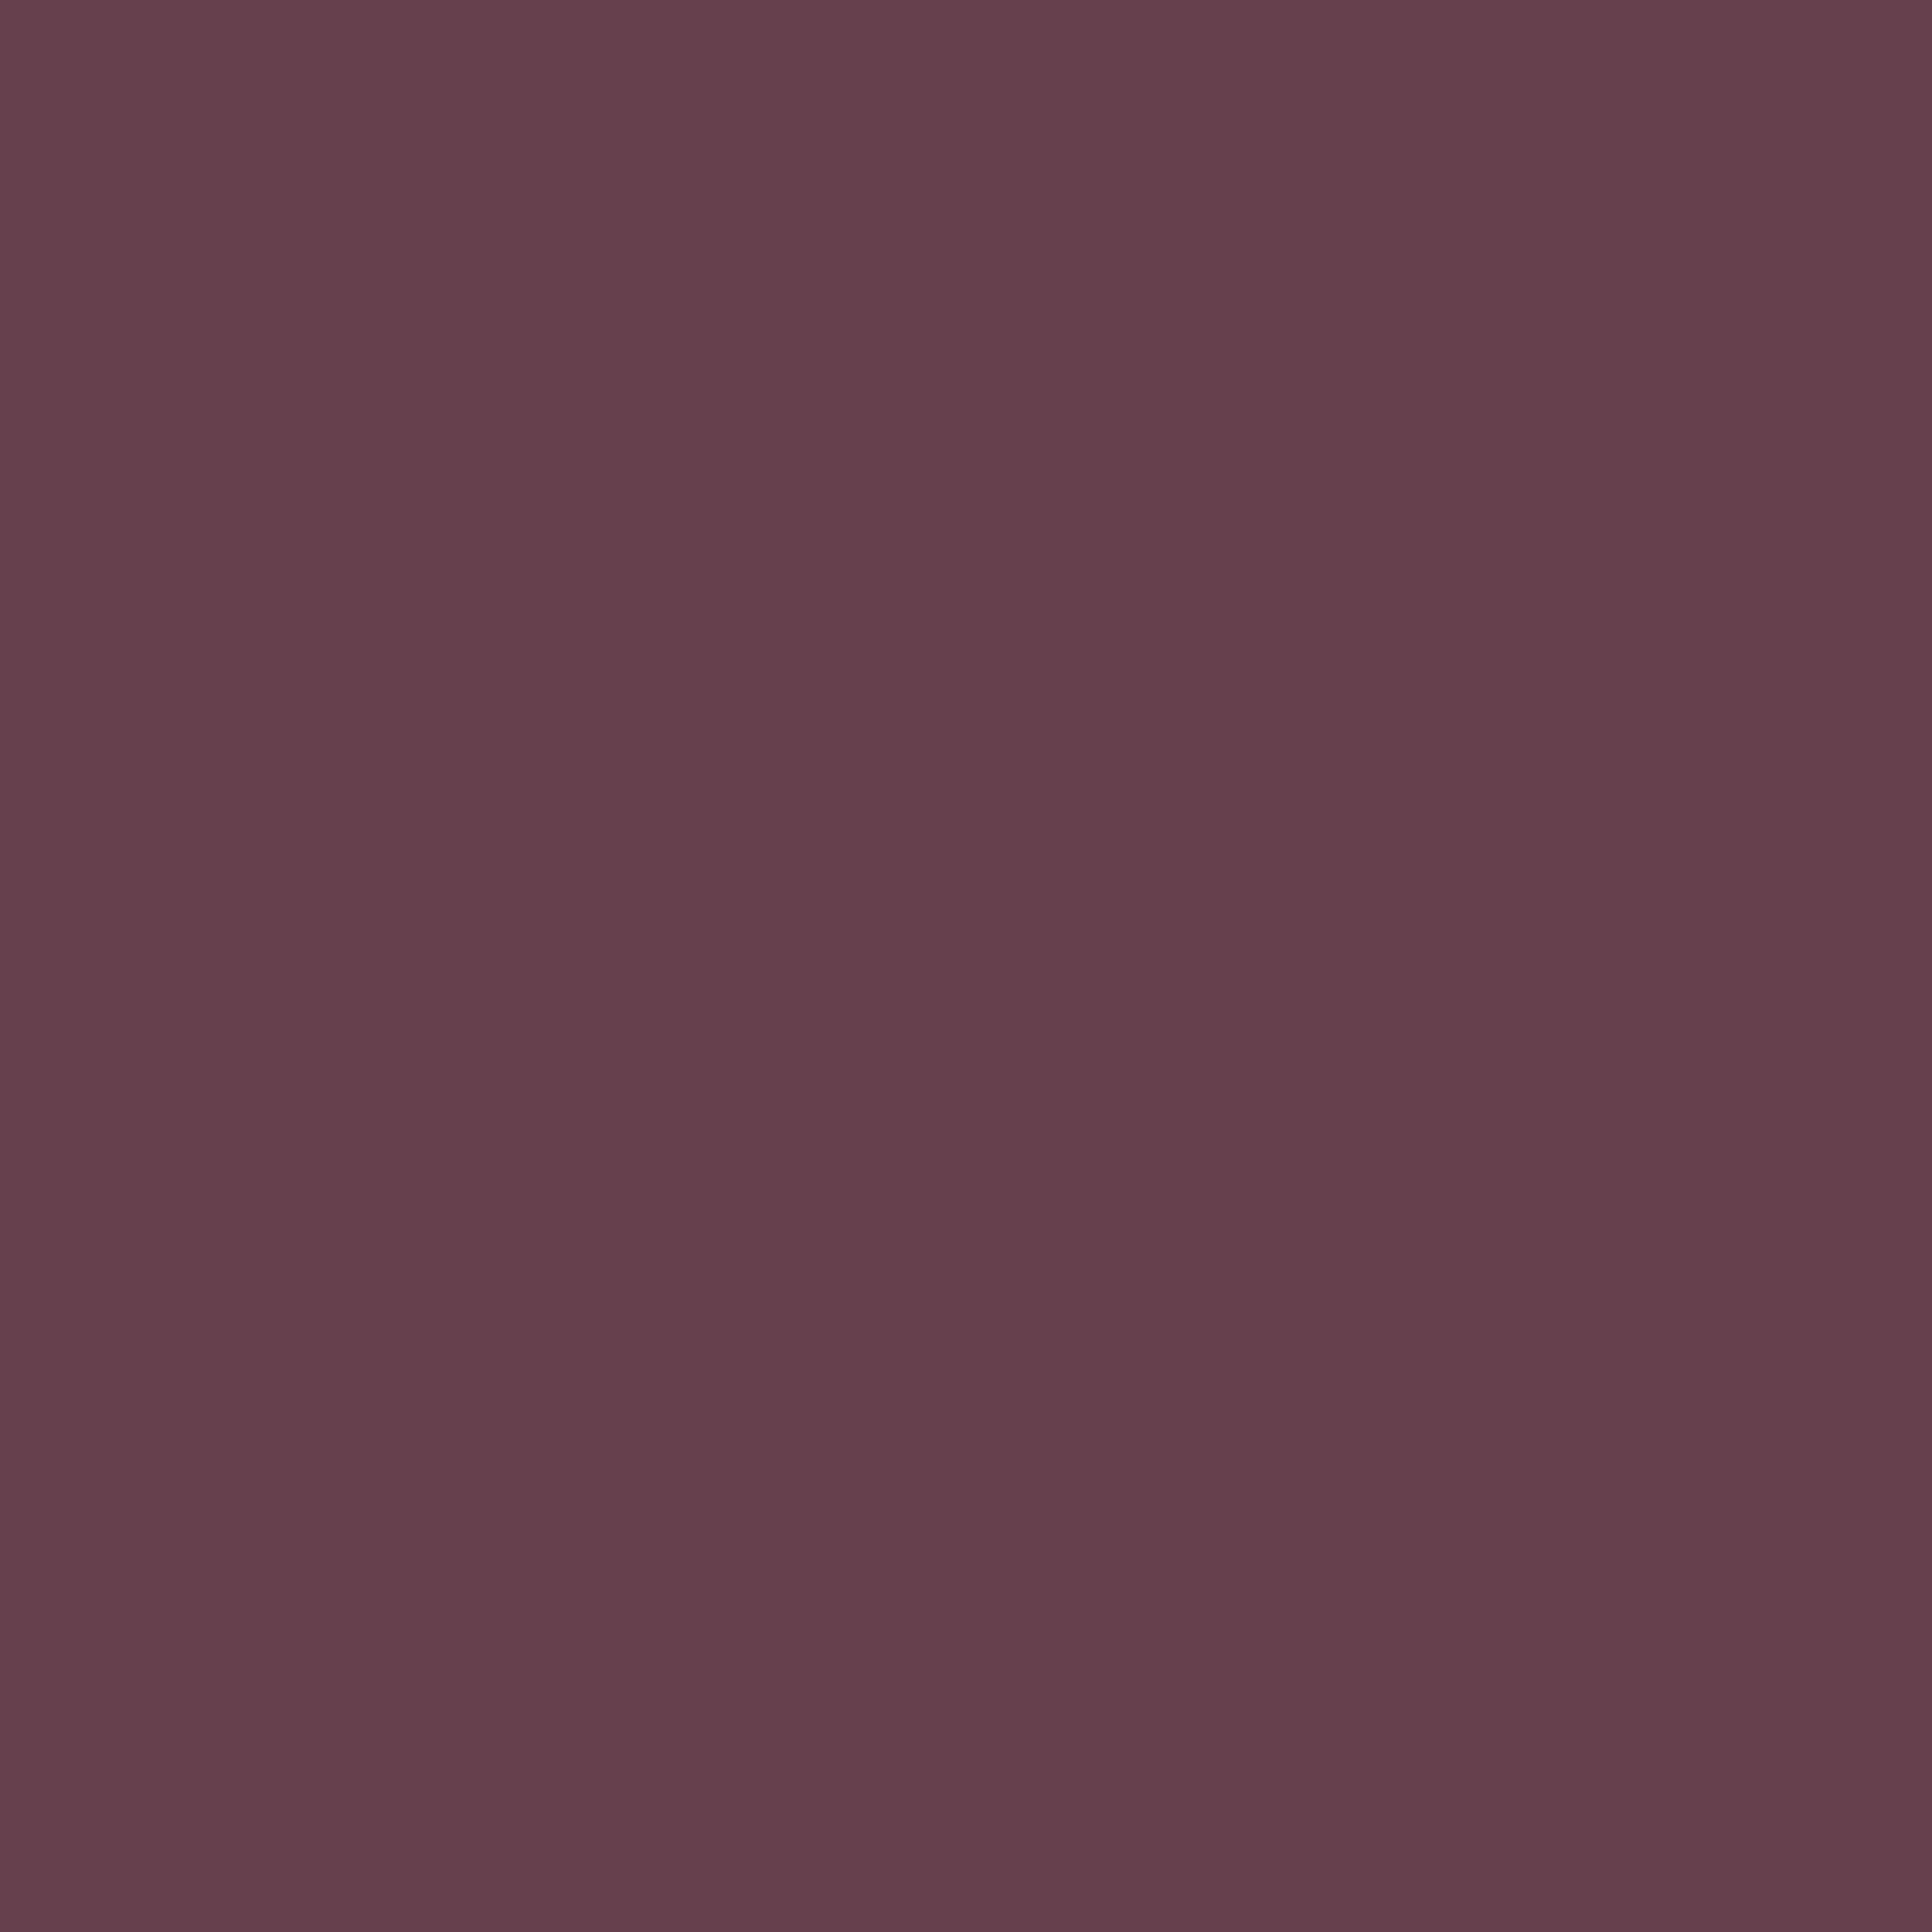 3600x3600 Deep Tuscan Red Solid Color Background